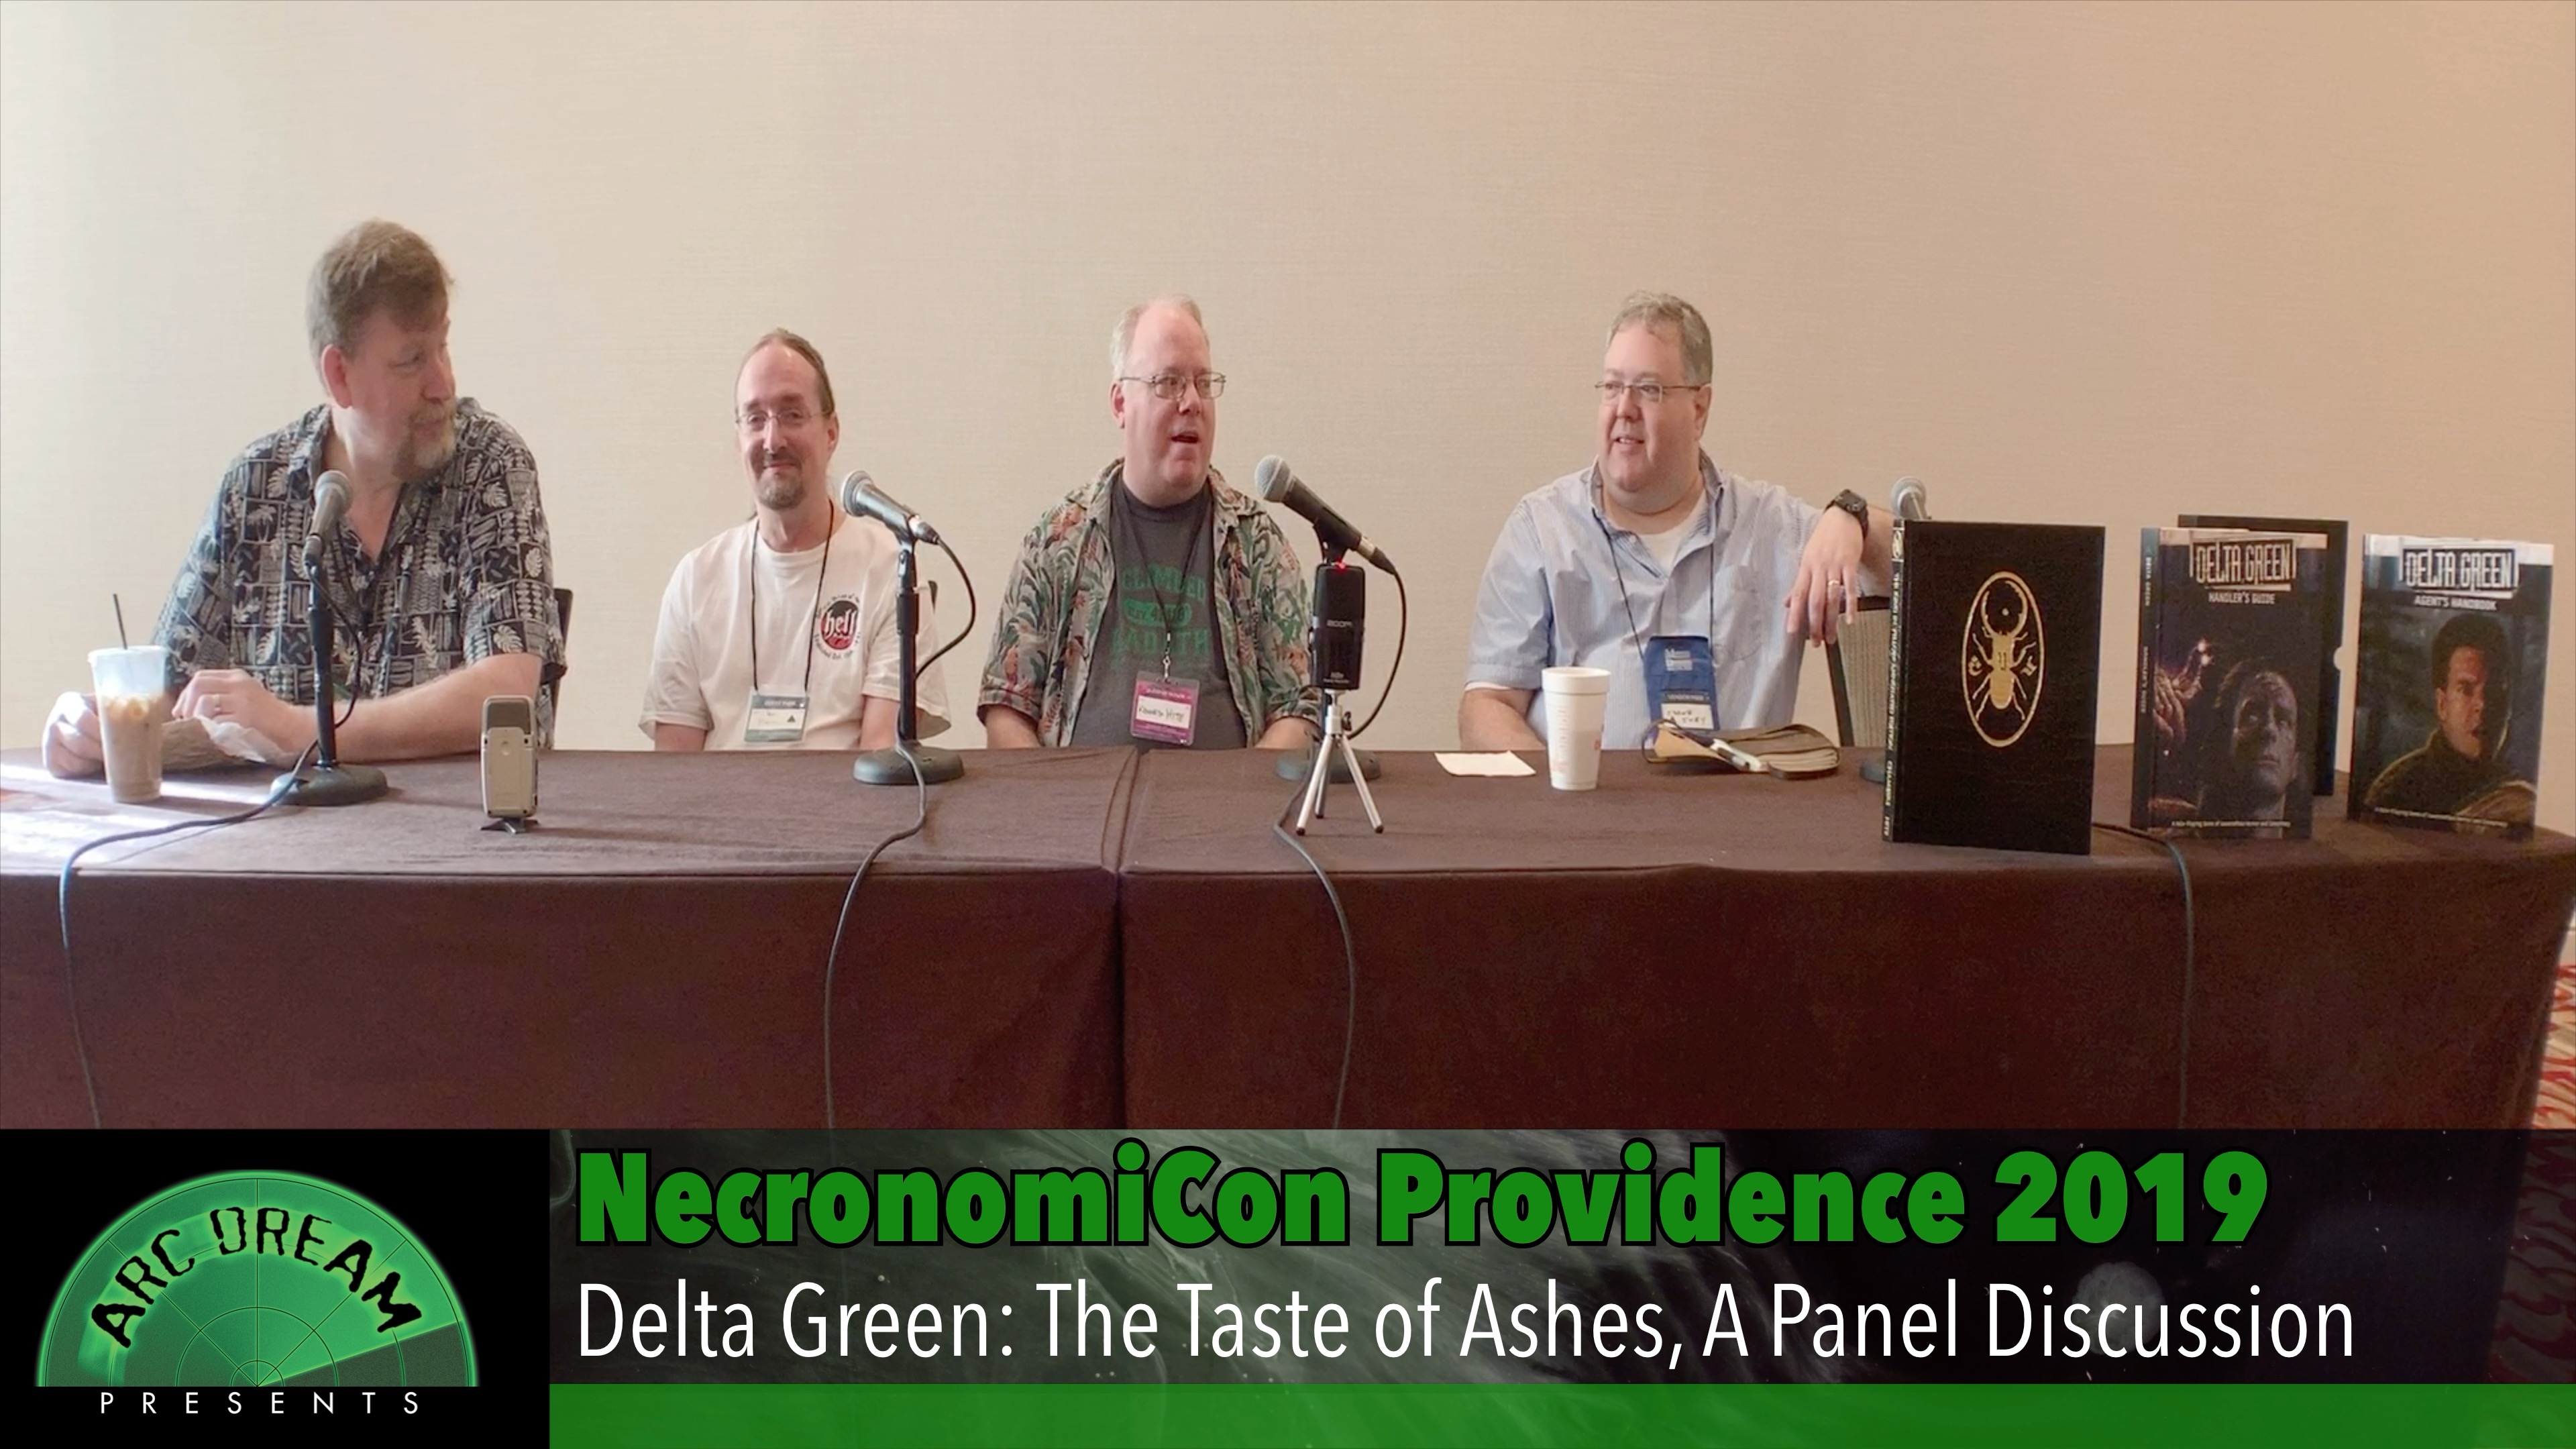 Adam Scott Glancy, Daniel Harms, Kenneth Hite, and Shane Ivey banter about Delta Green at NecronomiCon Providence 2019.